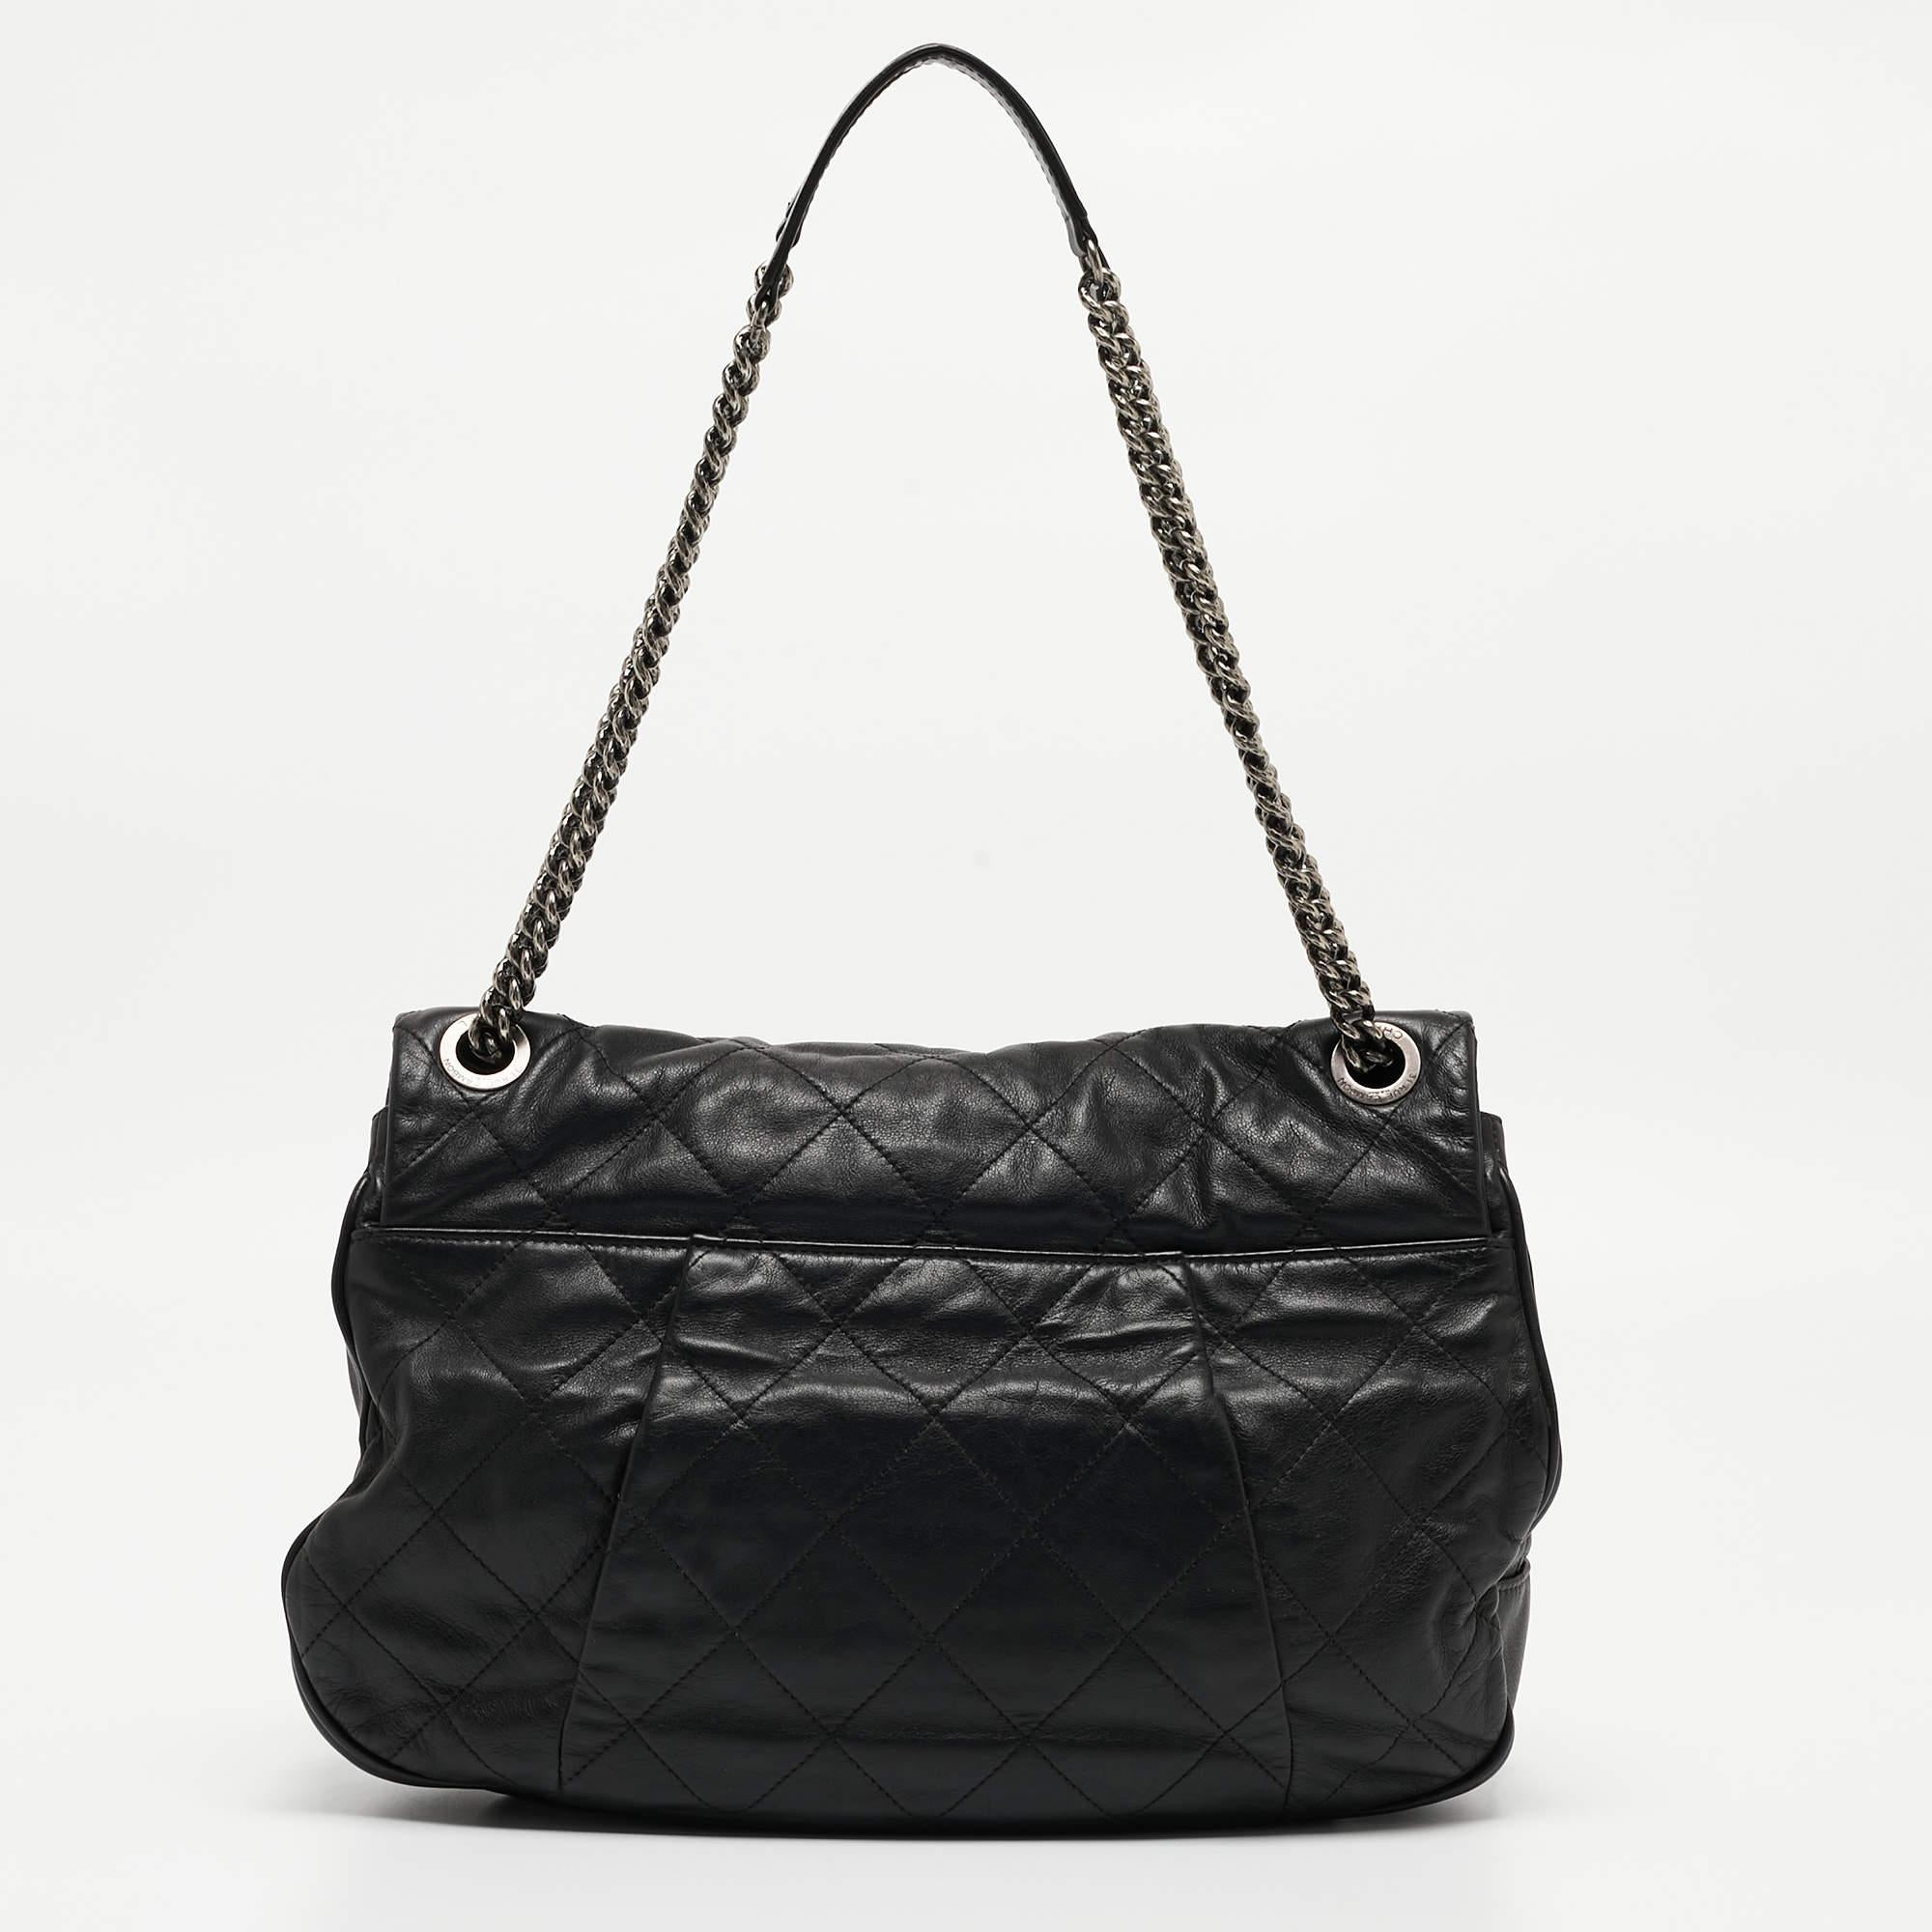 Chanel Black Quilted Leather Coco Pleats Flap Bag For Sale 6